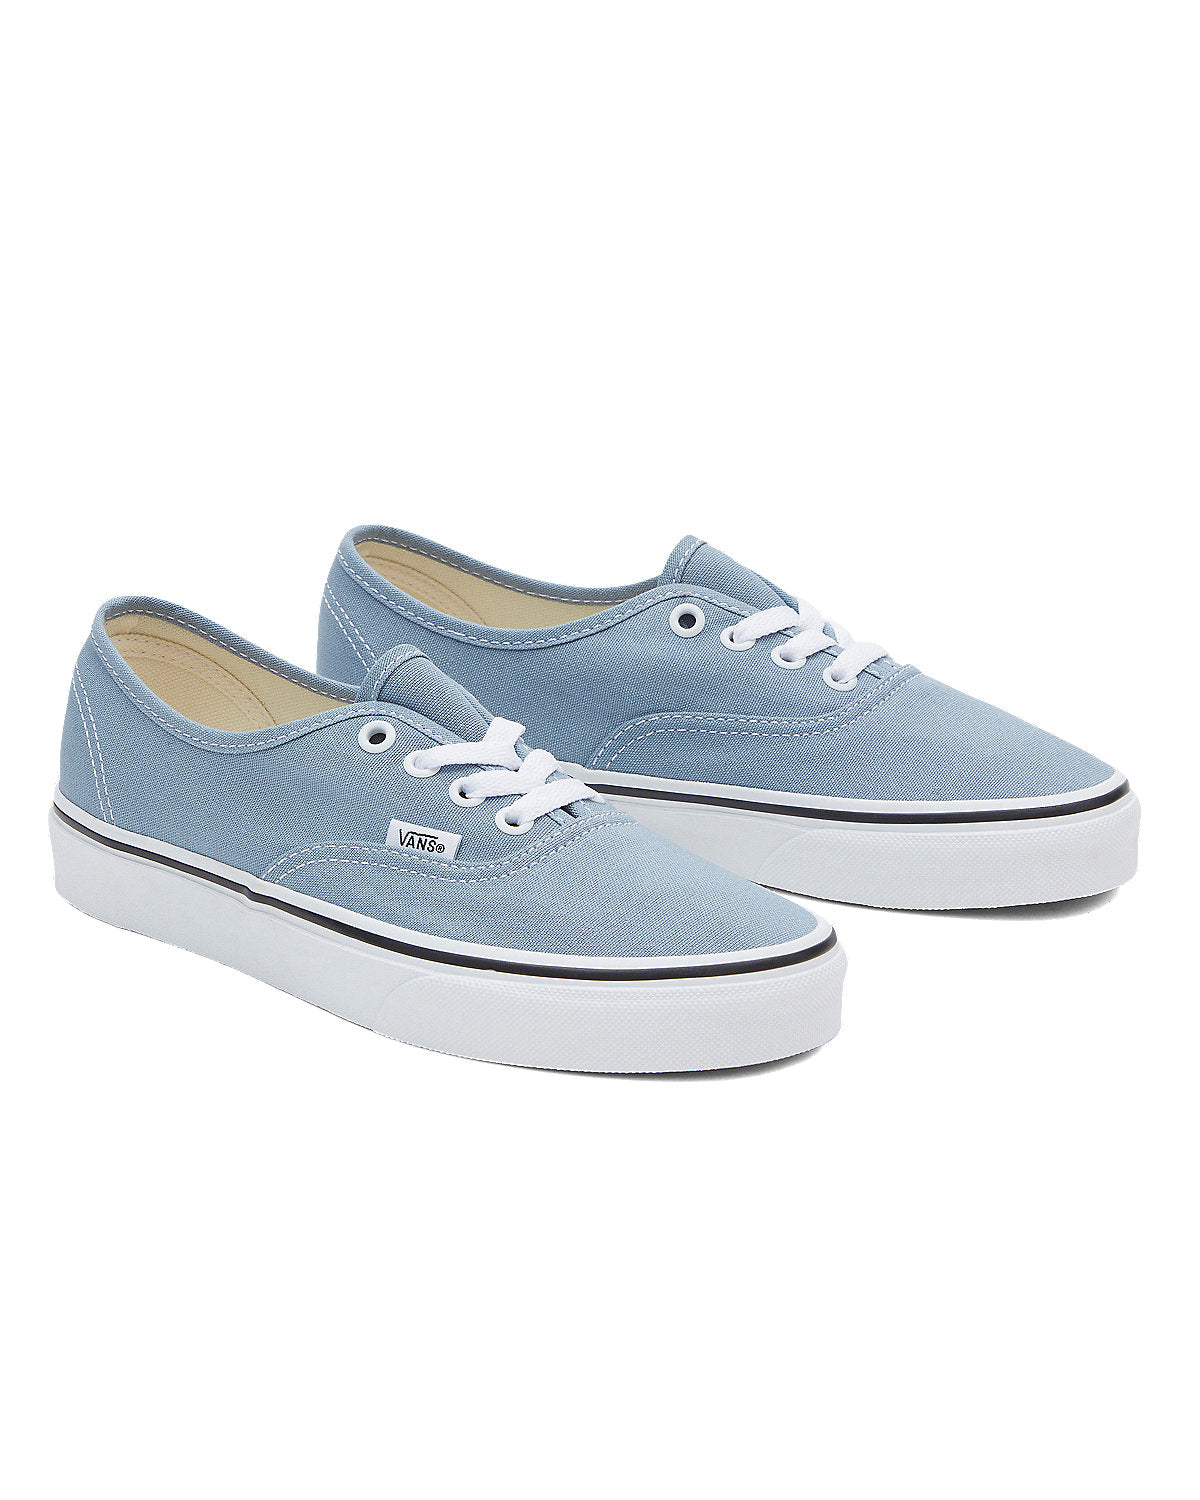 VANS Unisex Authentic Color Theory Trainers - Dusty Blue